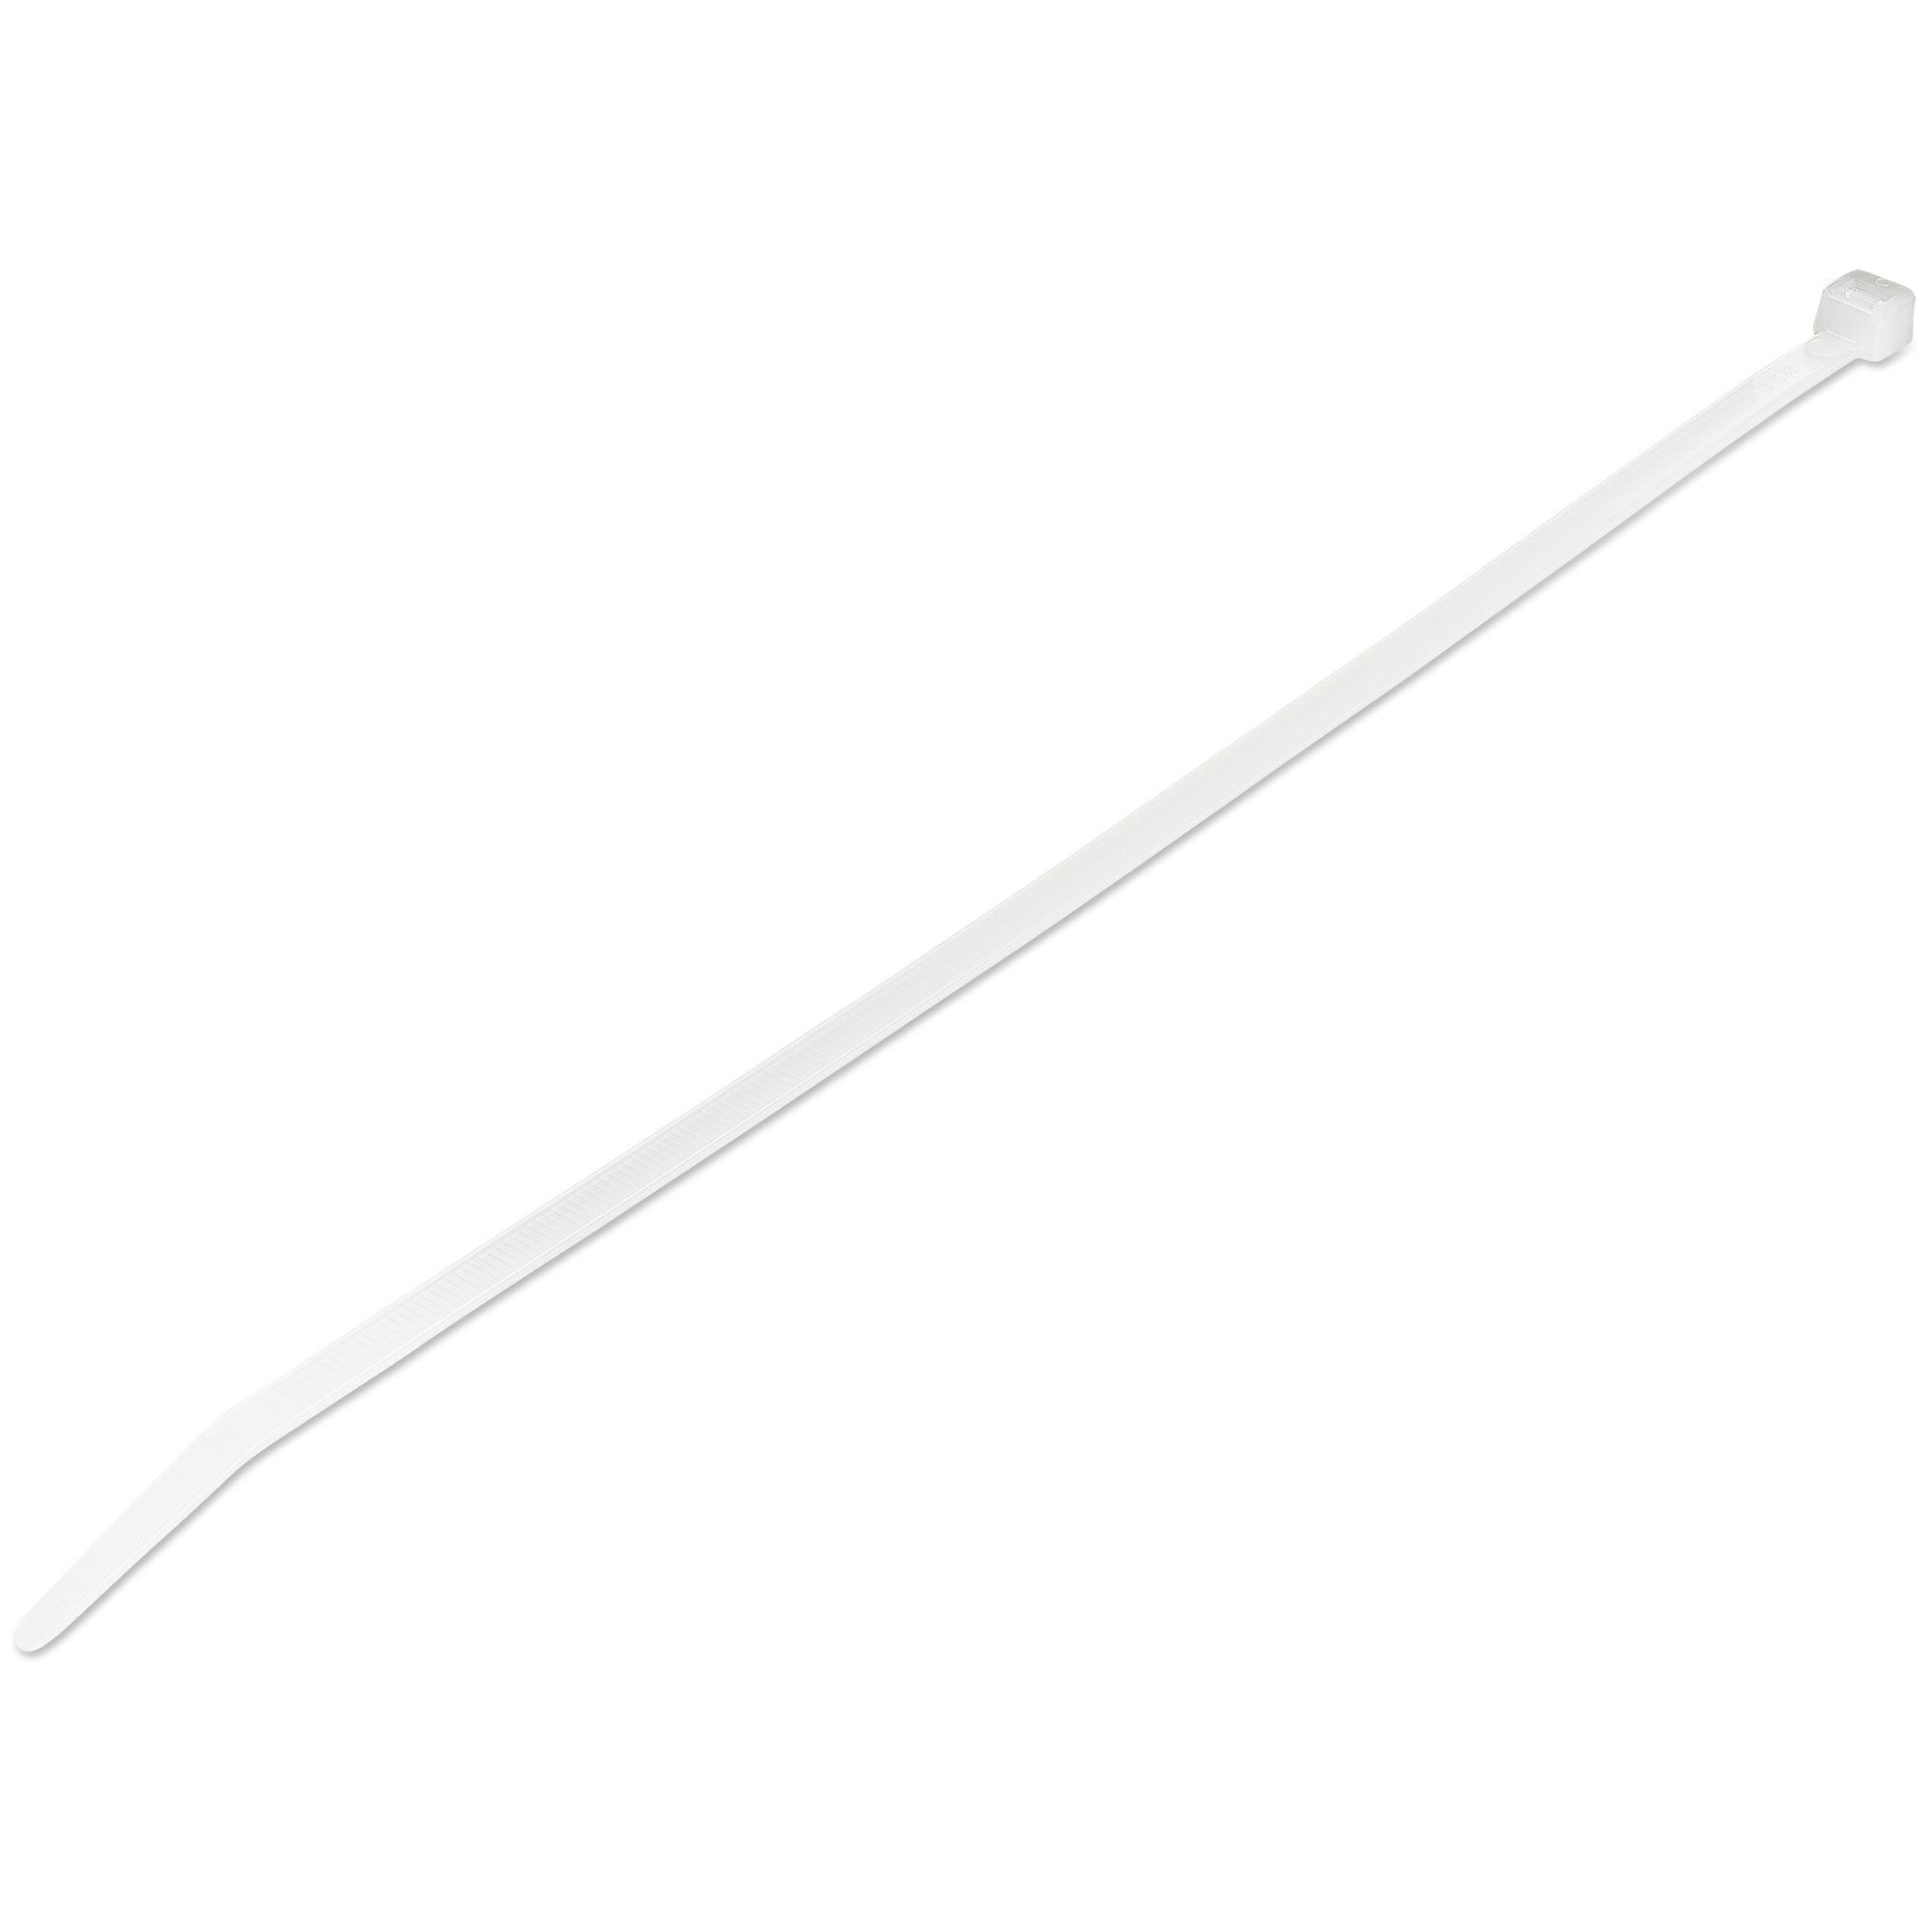 10"(25cm) Cable Ties - 1/8"(4mm) wide